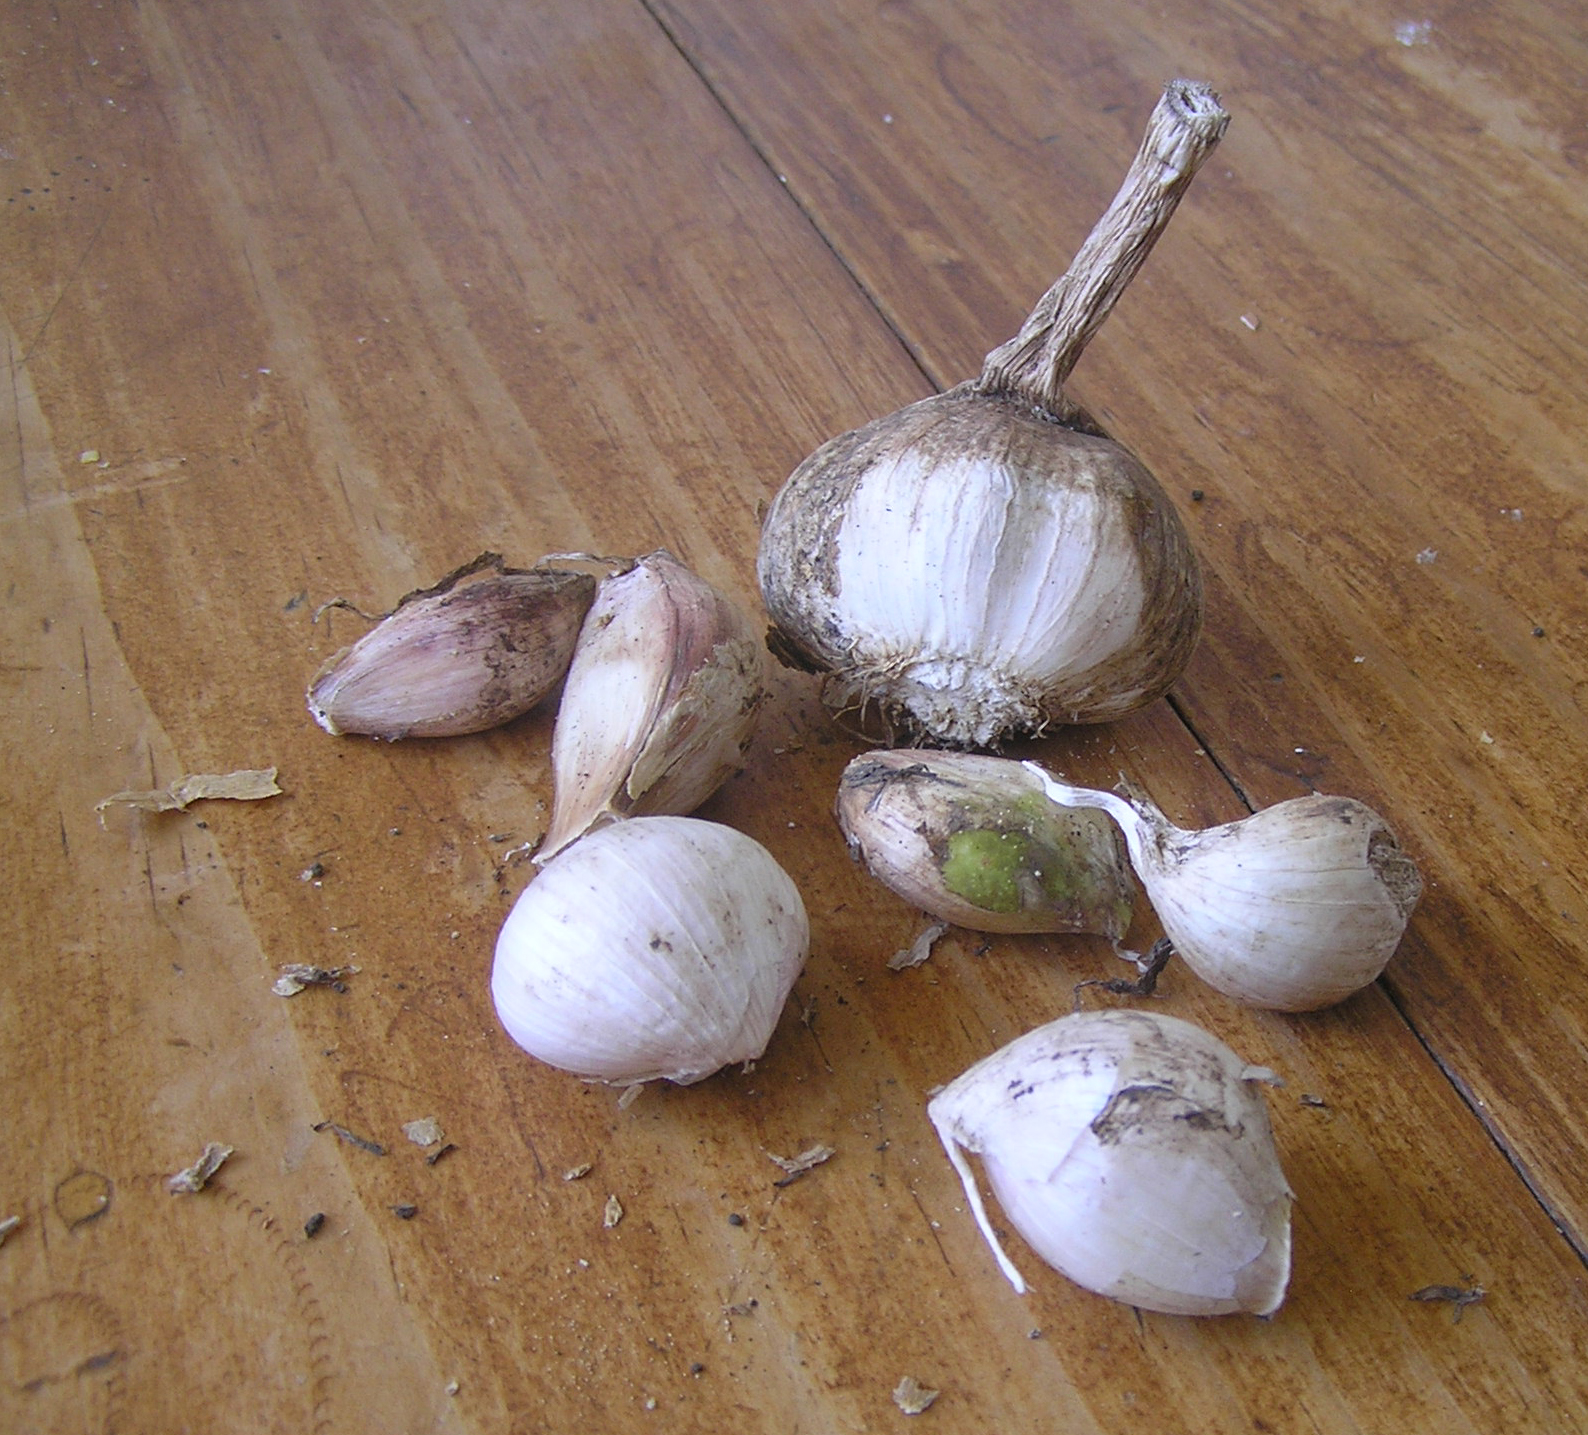 Autumn is the time to be planting garlic